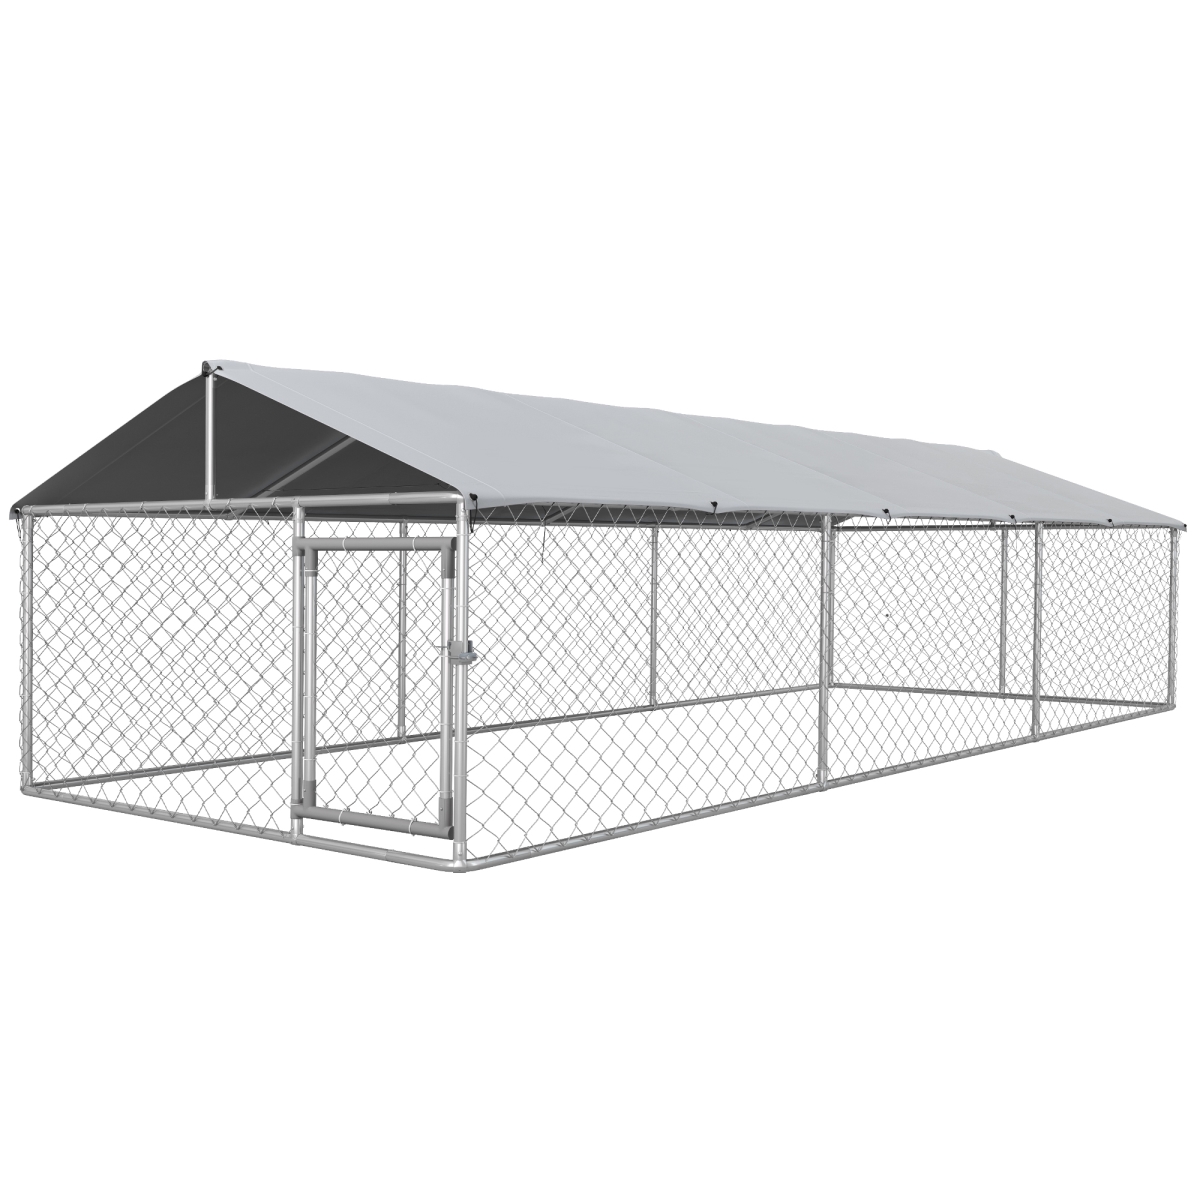 Picture of 212 Main D02-179V01SR 19.7 x 7.5 x 4.9 ft. PawHut Dog Kennel Outdoor for Large-Sized Dogs with Waterproof UV Resistant Roof&#44; Silver